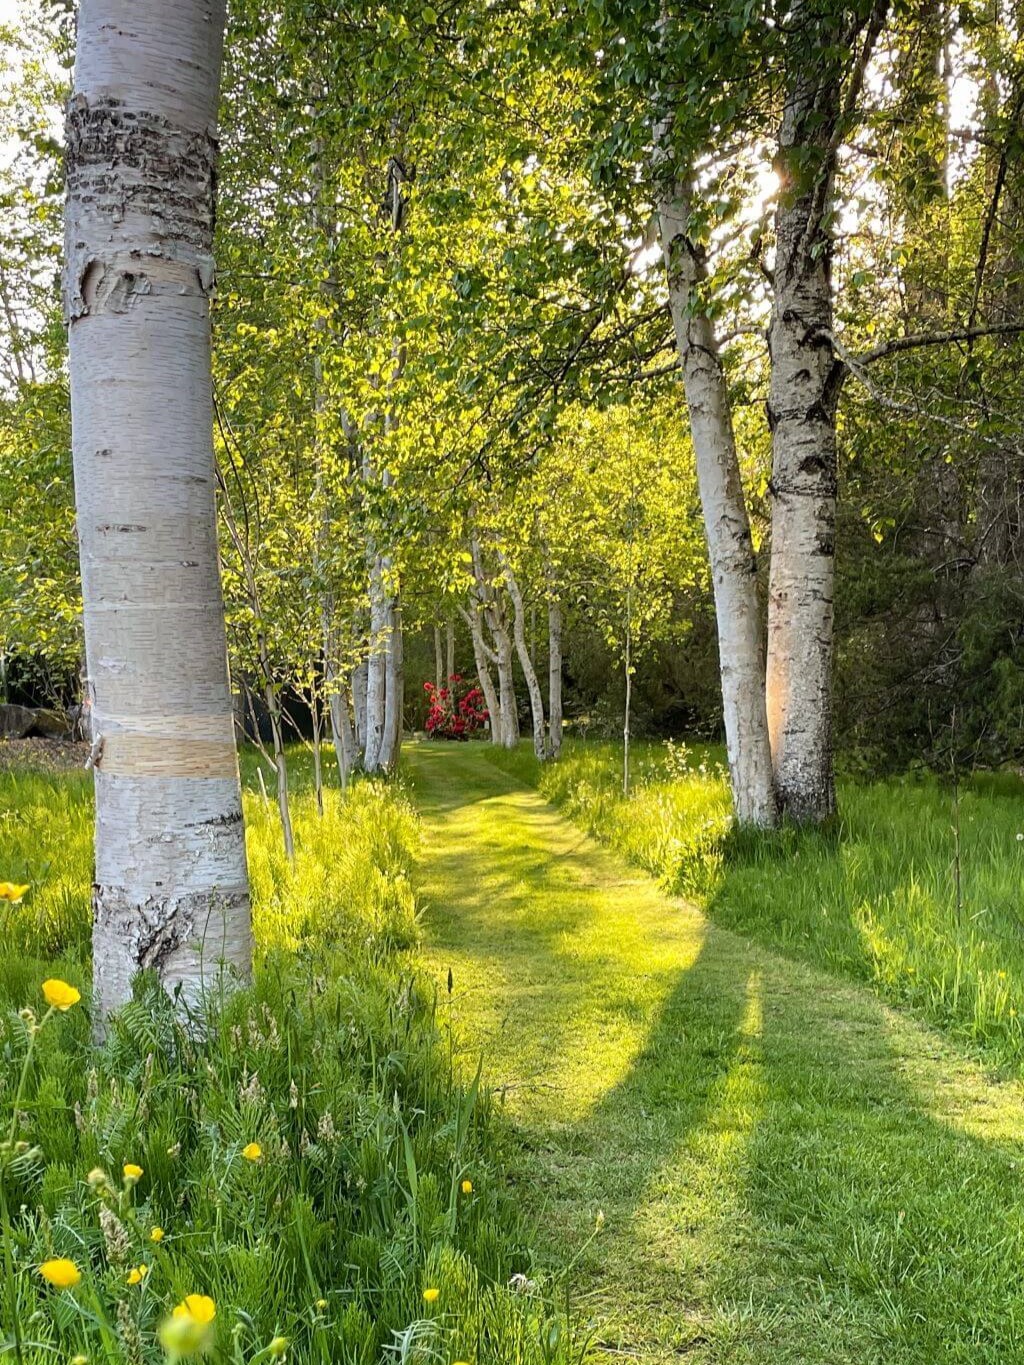 A row of white Himalayan Birch trees is backlit by sunshine and surrounded by overgrowing grasses with a path of cut grass leading through the trees to a bush of red rhododendron flowers.